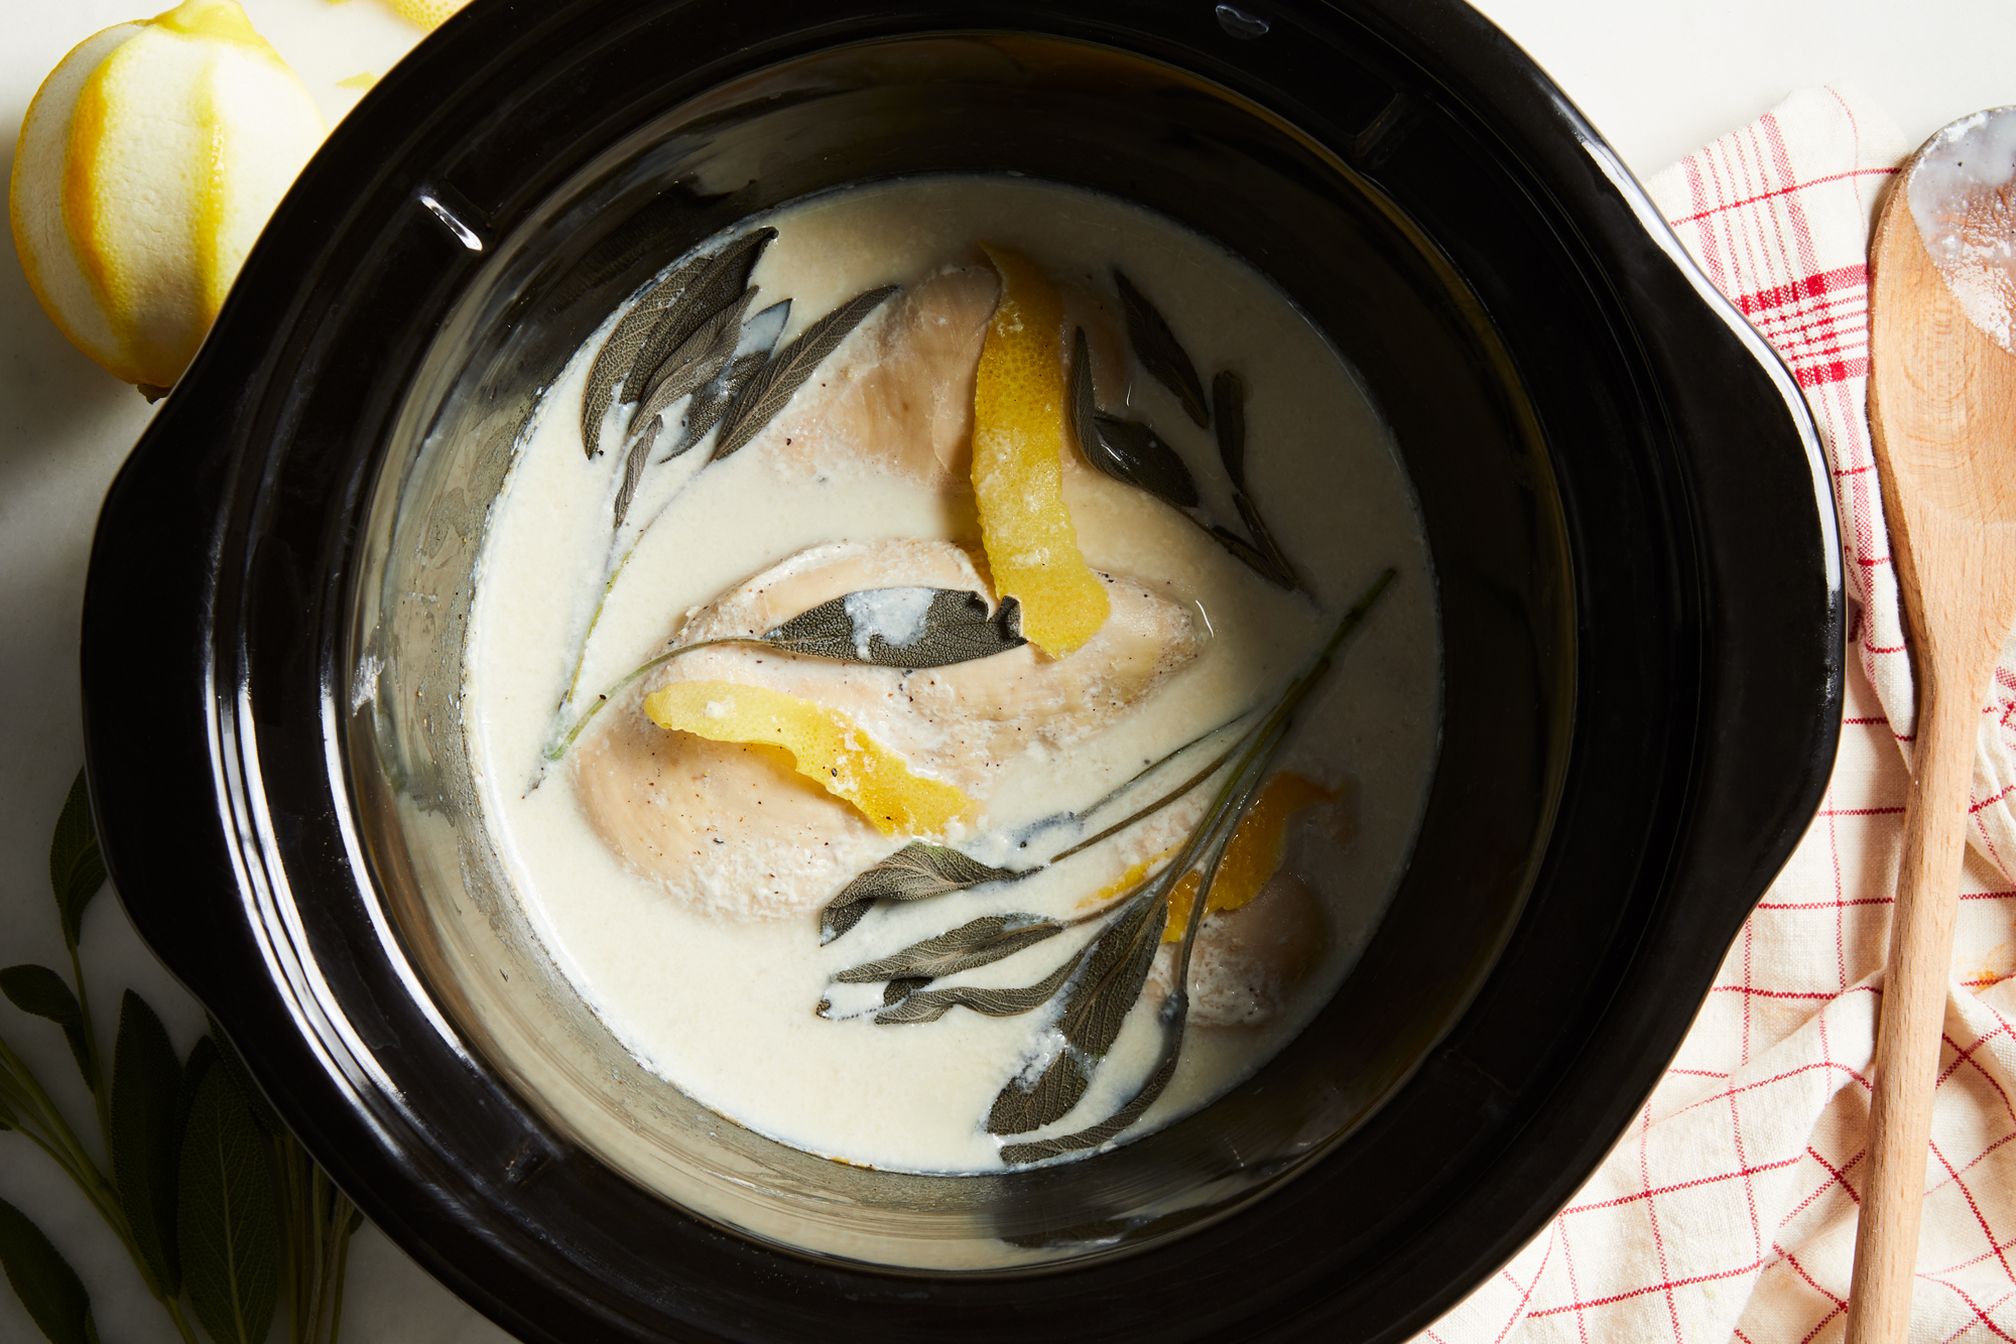 Slow Cooker Chicken Breasts With Lemon Sage Milk Recipe On Food52,Places To Have A Birthday Party For Adults Near Me